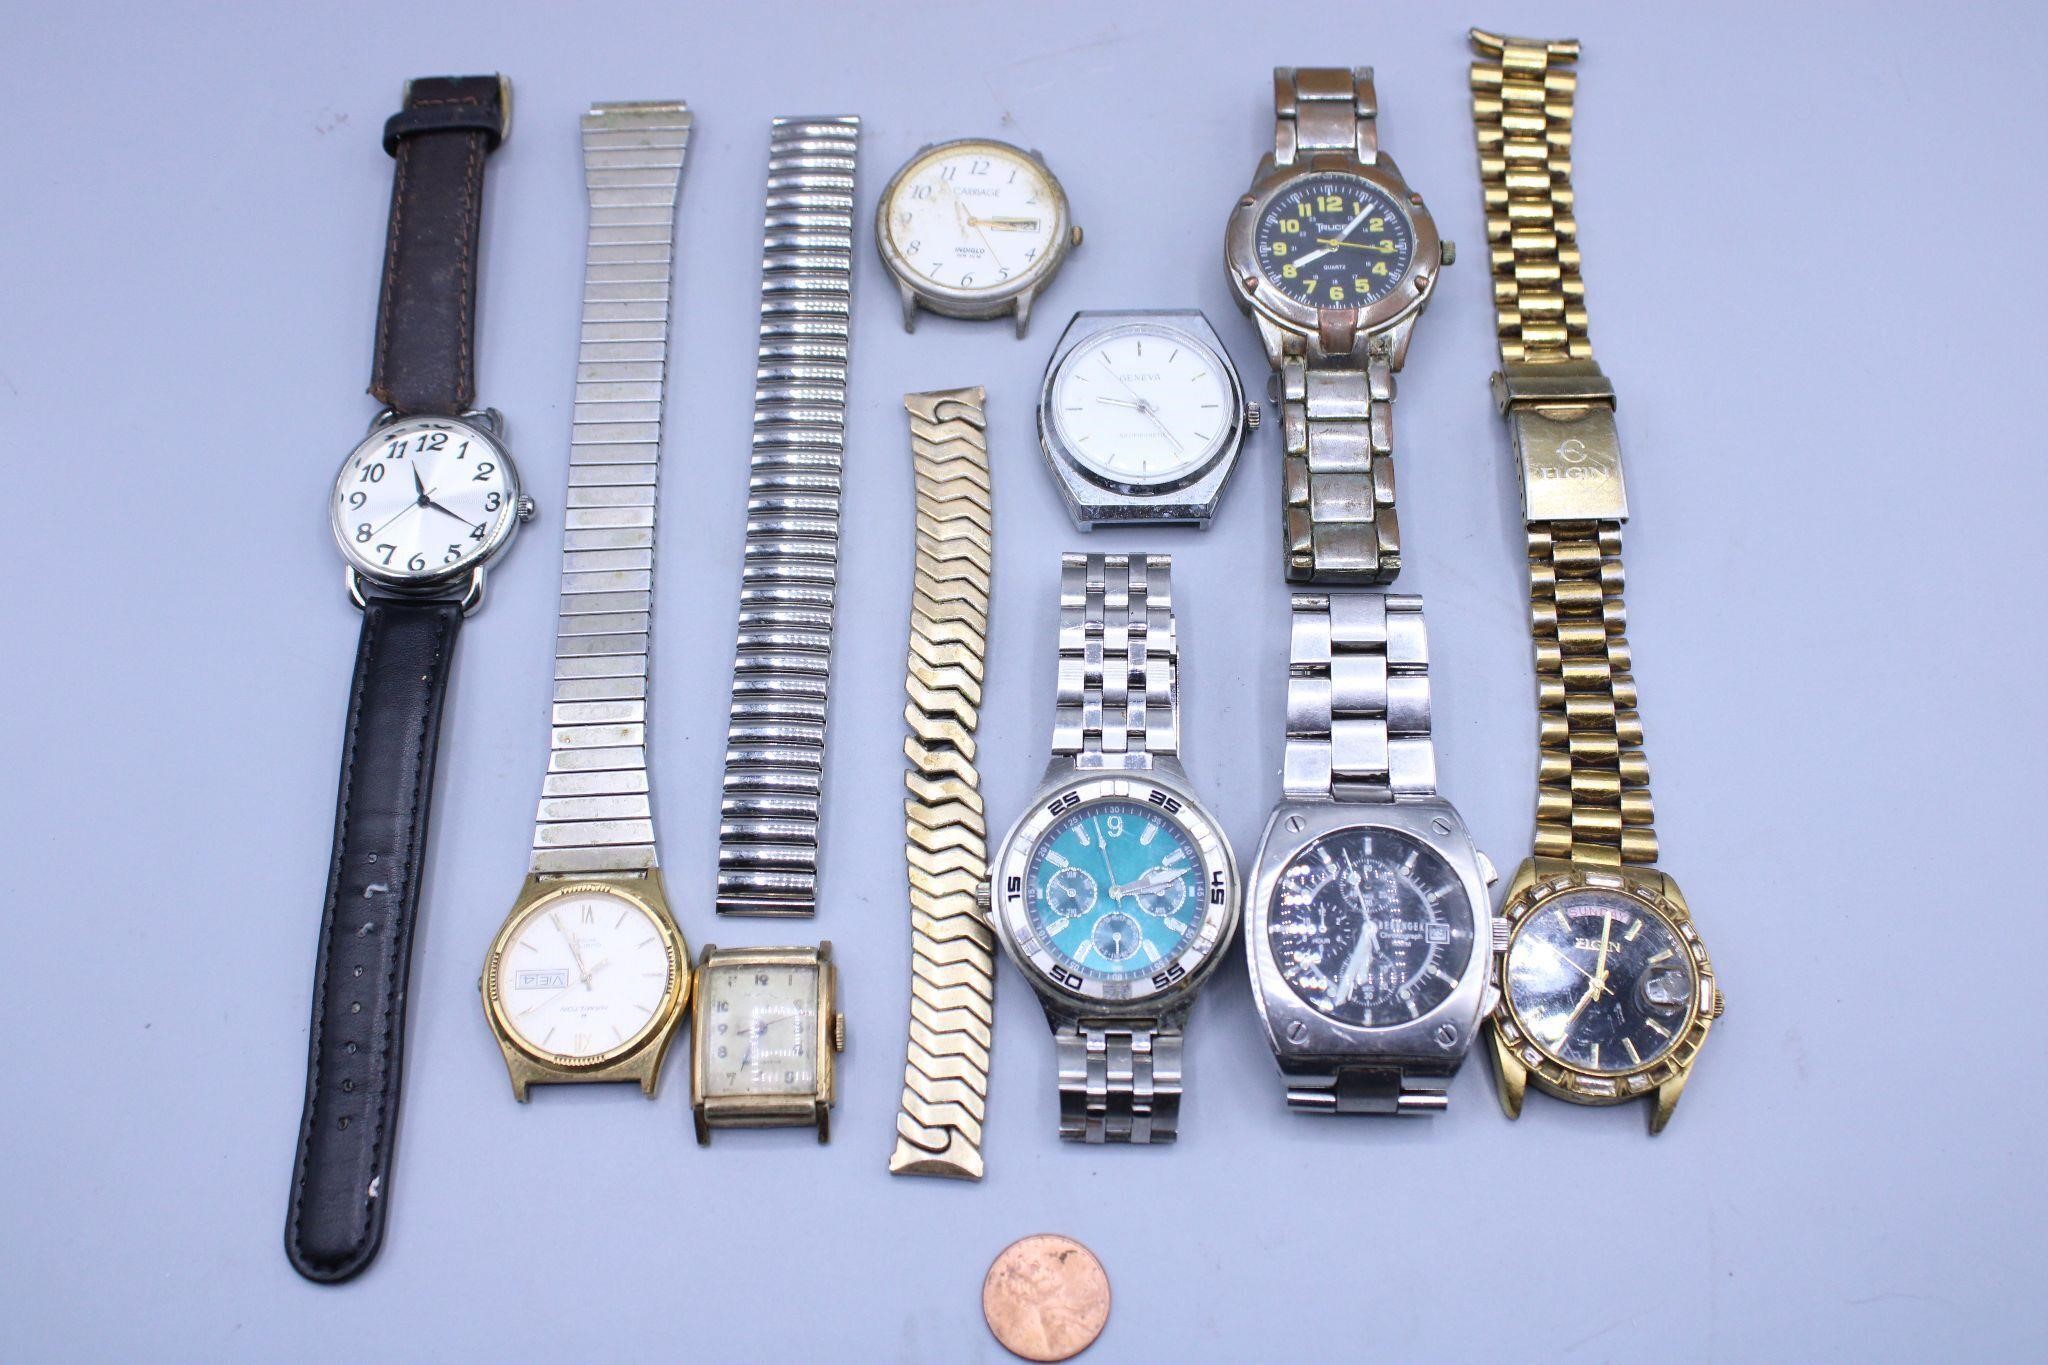 Watches Bands, Parts for Craft or Repair